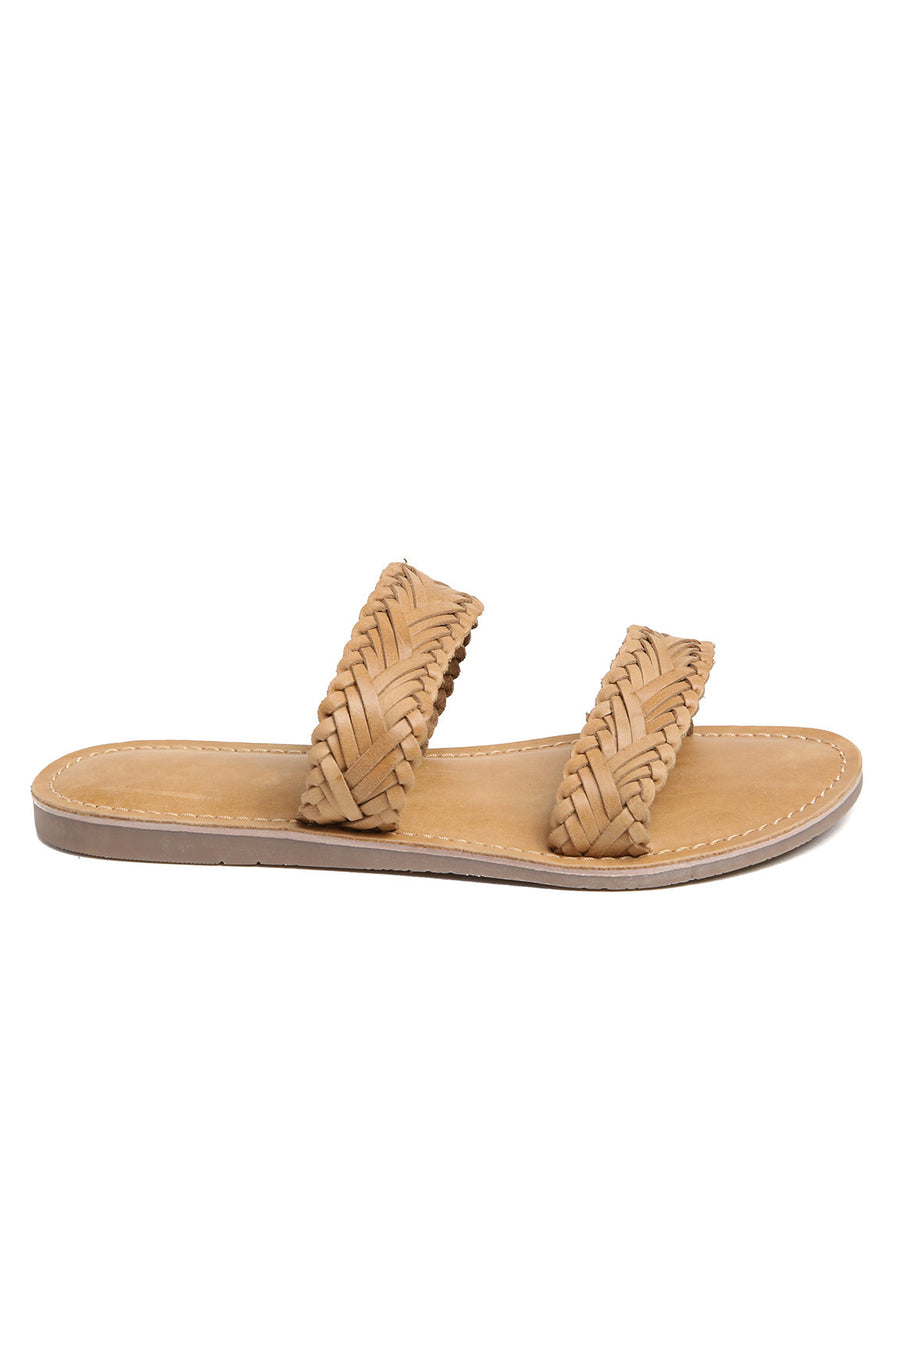 Pier Tan Braided Leather Sandal Front